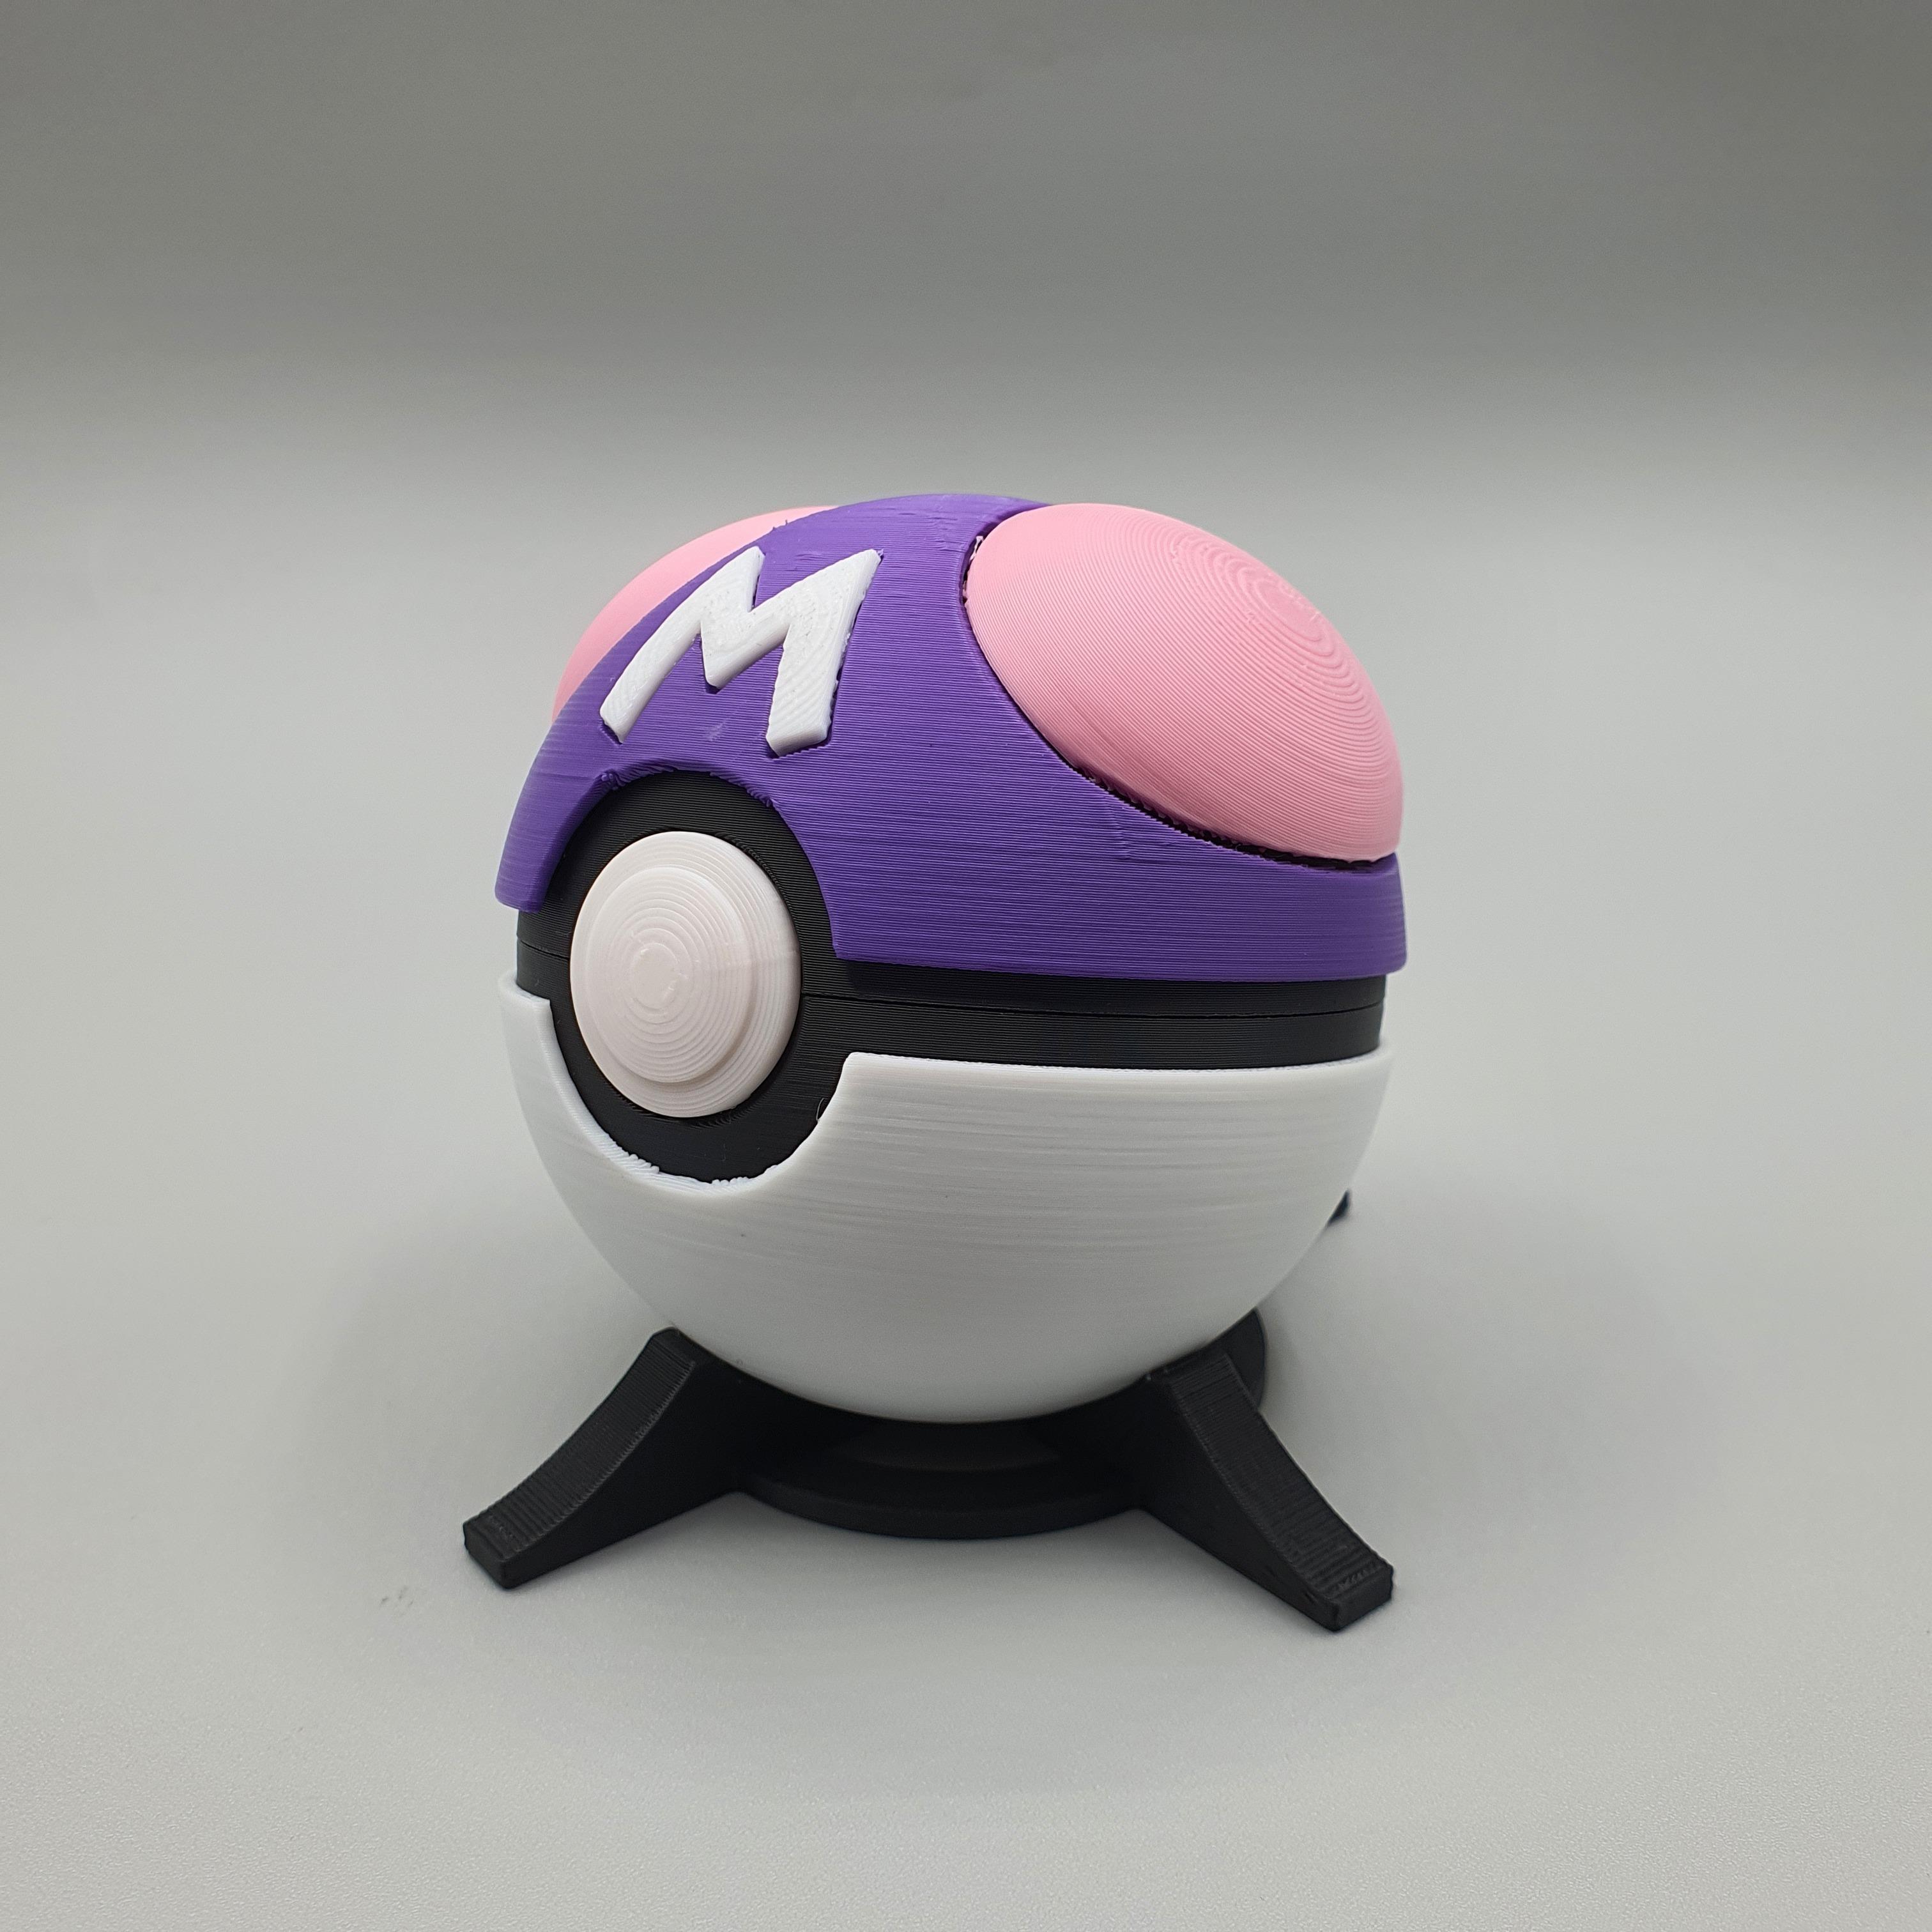 POKEMON MASTER BALL CONTAINER SWAPPABLE 3d model